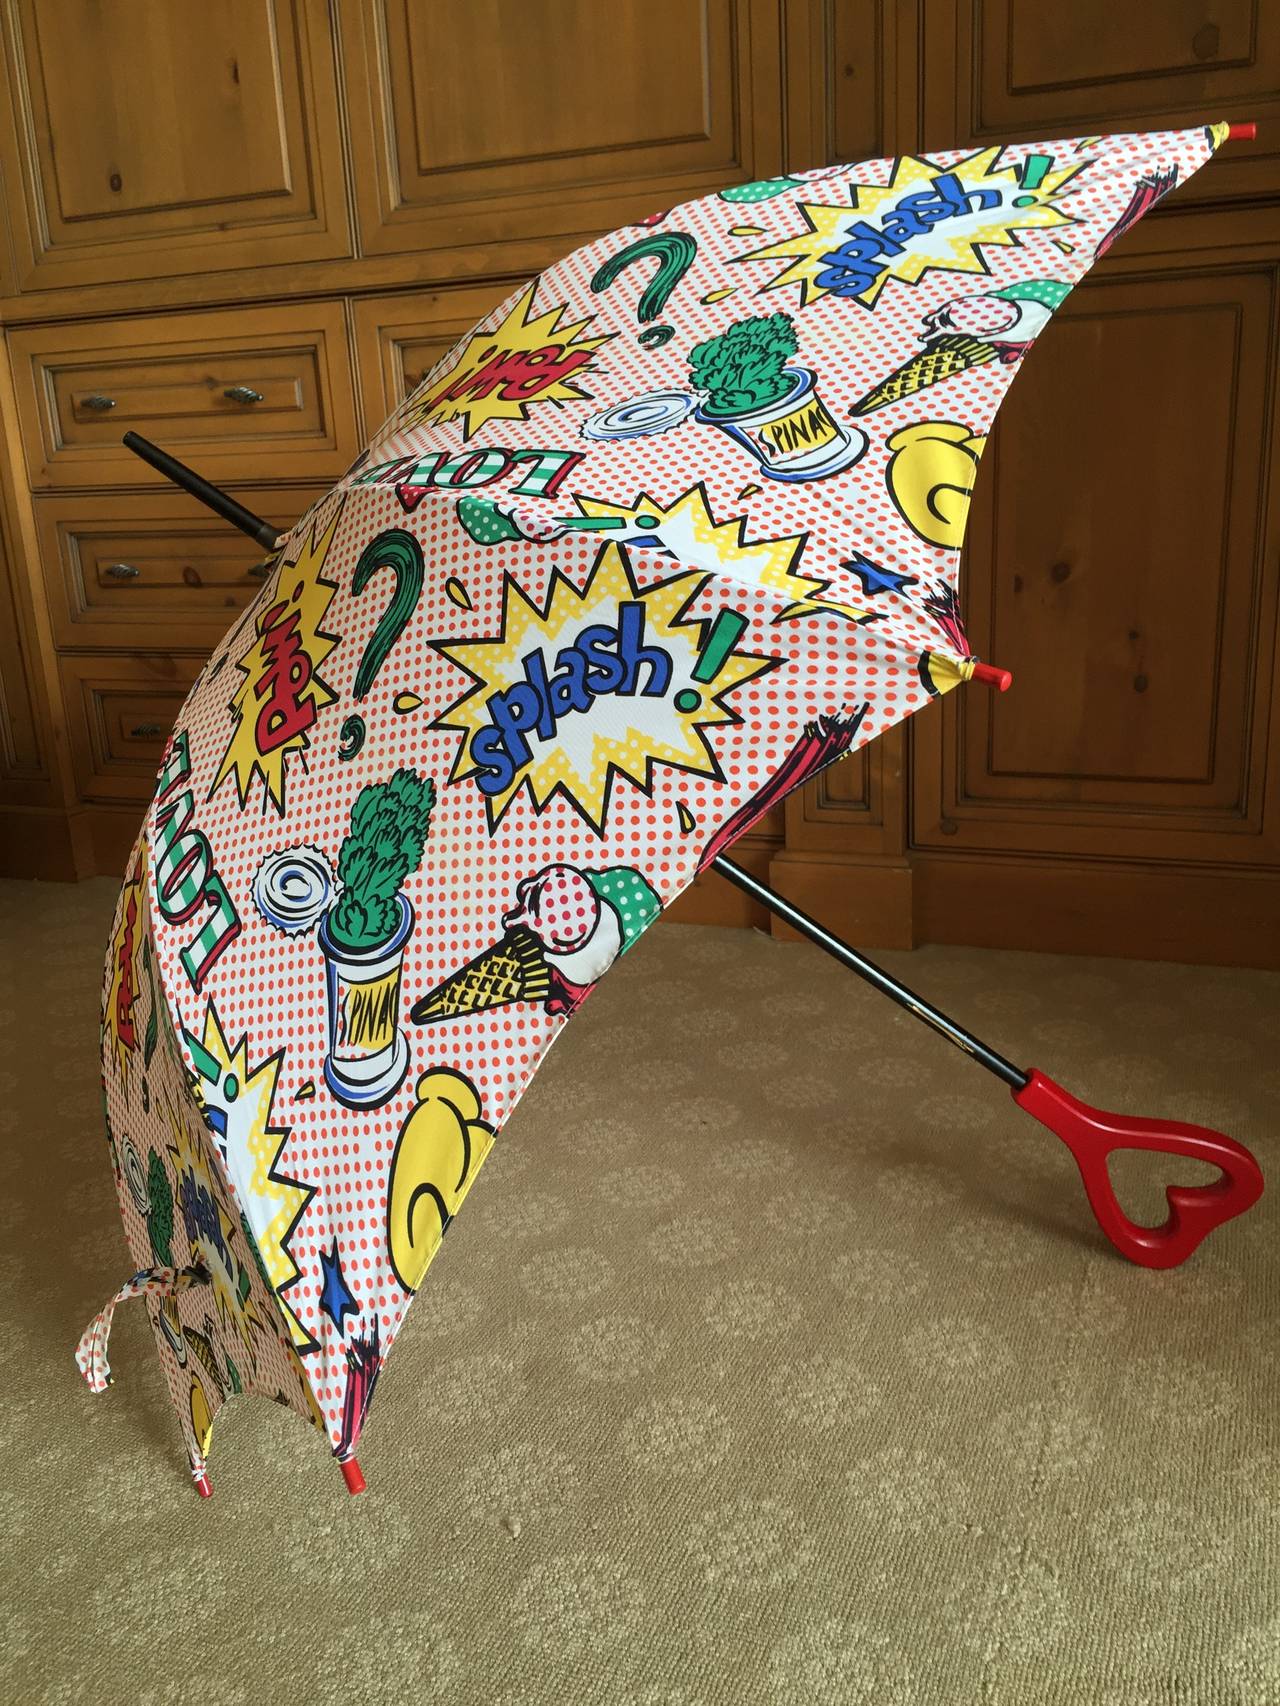 Moschino Boutique Rare Vintage Lichtenstein Inspired Umbrella with Heart Handle
Purchased in Italy in Moschino boutique
38